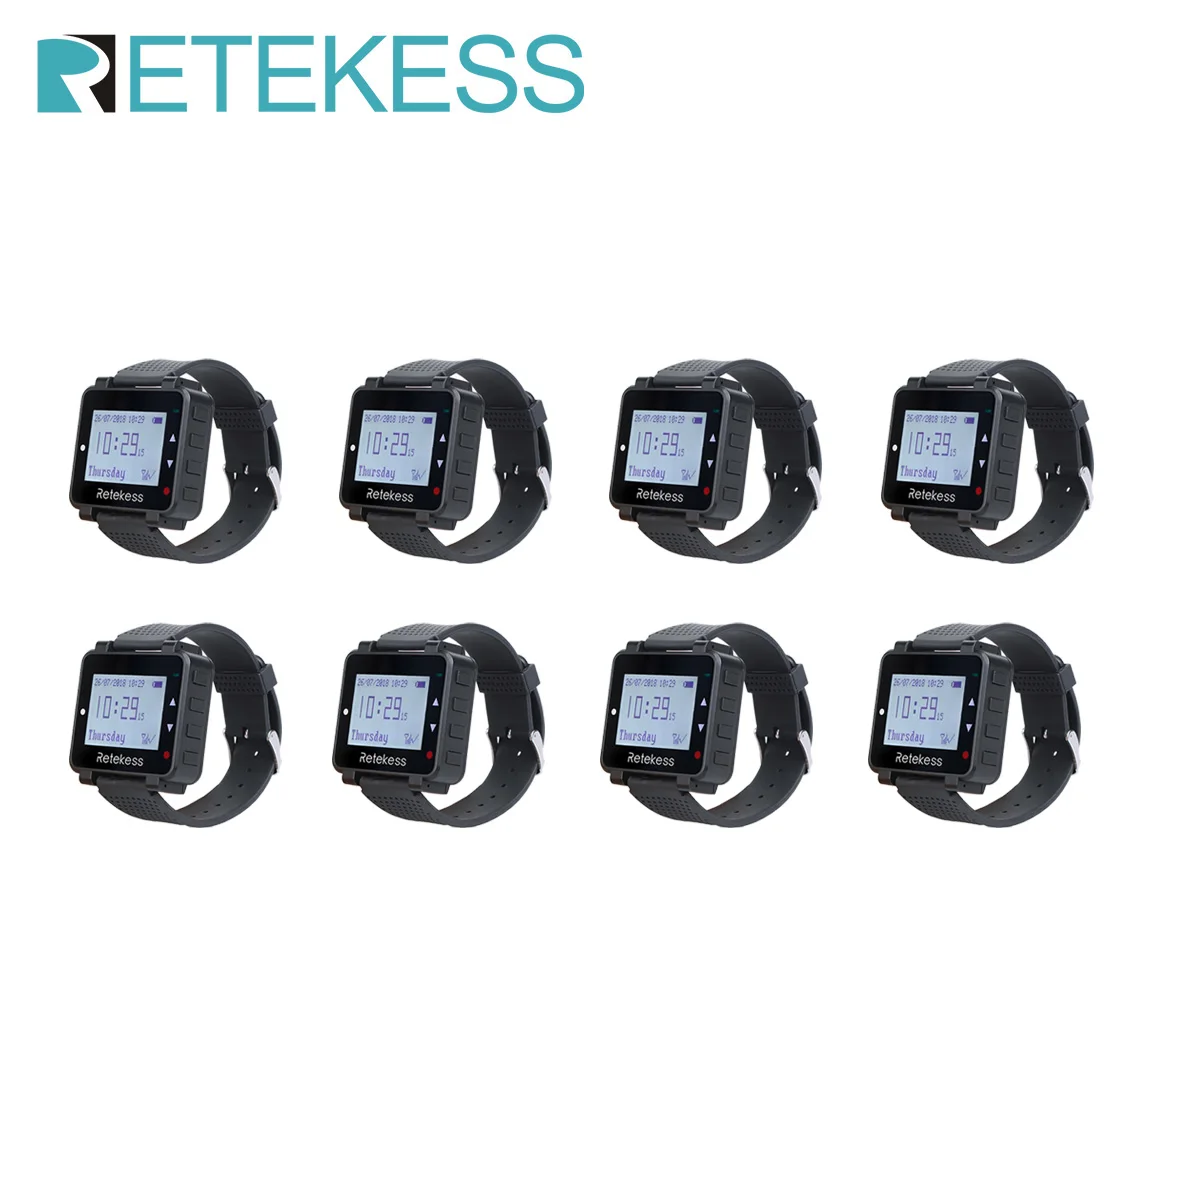 

Retekess T128 Restaurant Pager Wireless Waiter Calling System 8 Watch Bell Receivers Customer Service For Cafe Bar Clinic Hotel